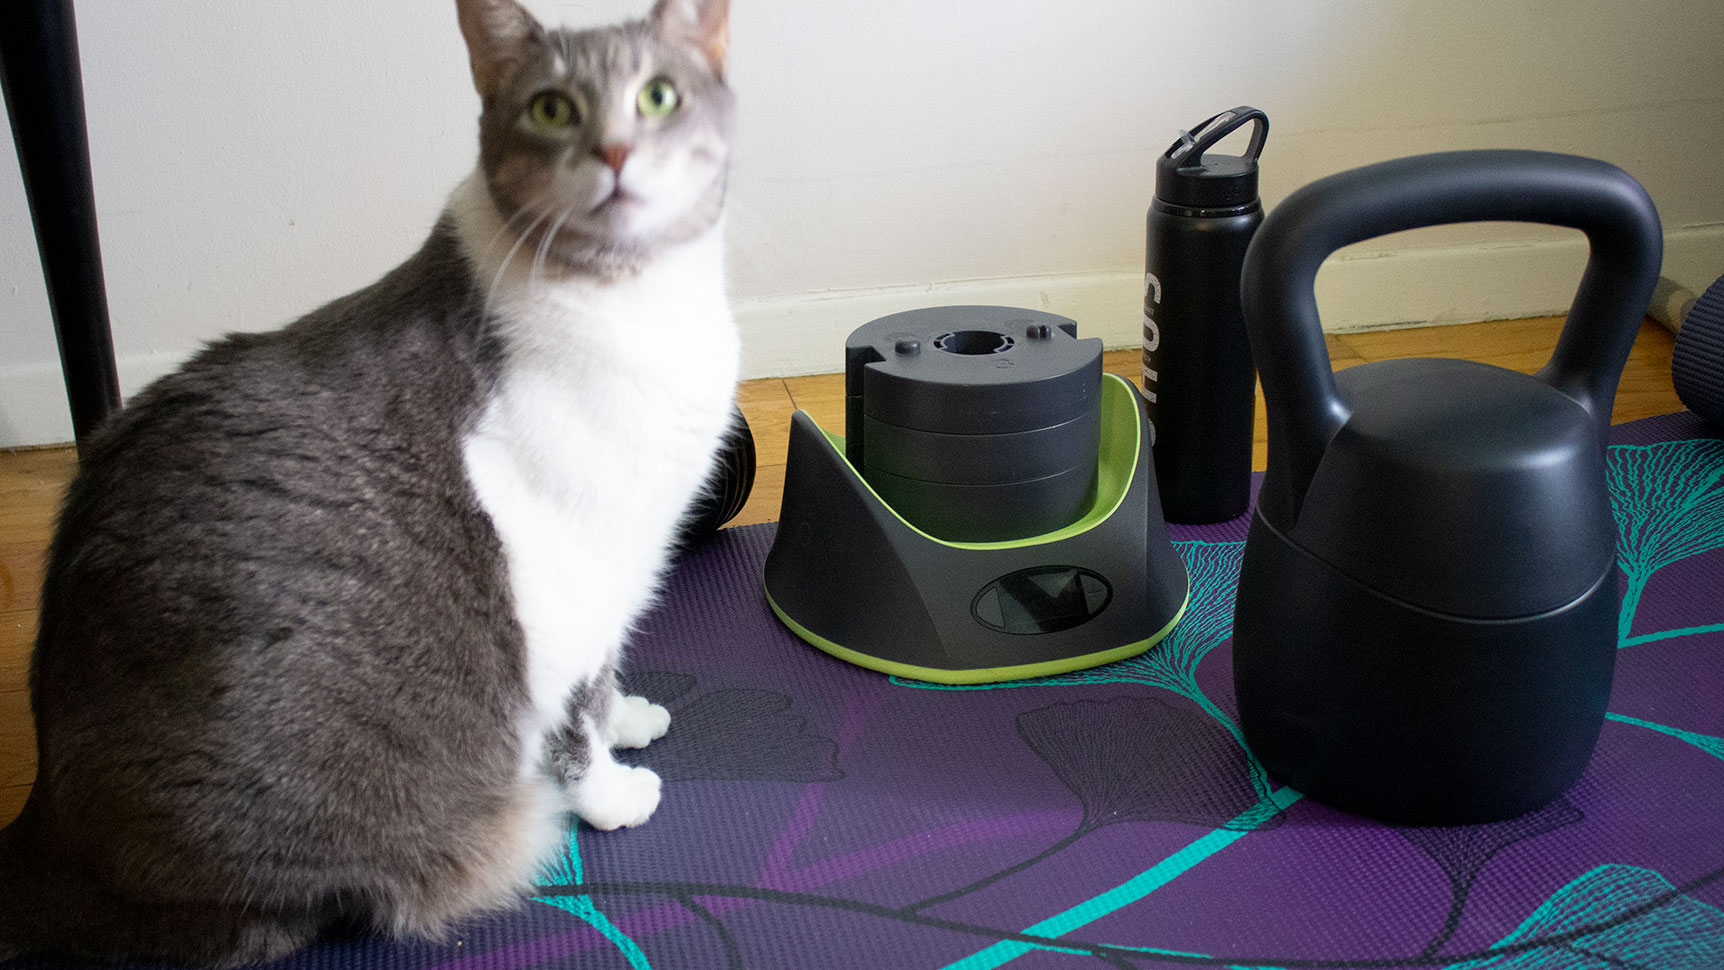 Blurry, uncooperative 8 kg cat for scale. My cat is huge, but so is the KettlebellConnect.  (Photo: Victoria Song/Gizmodo)